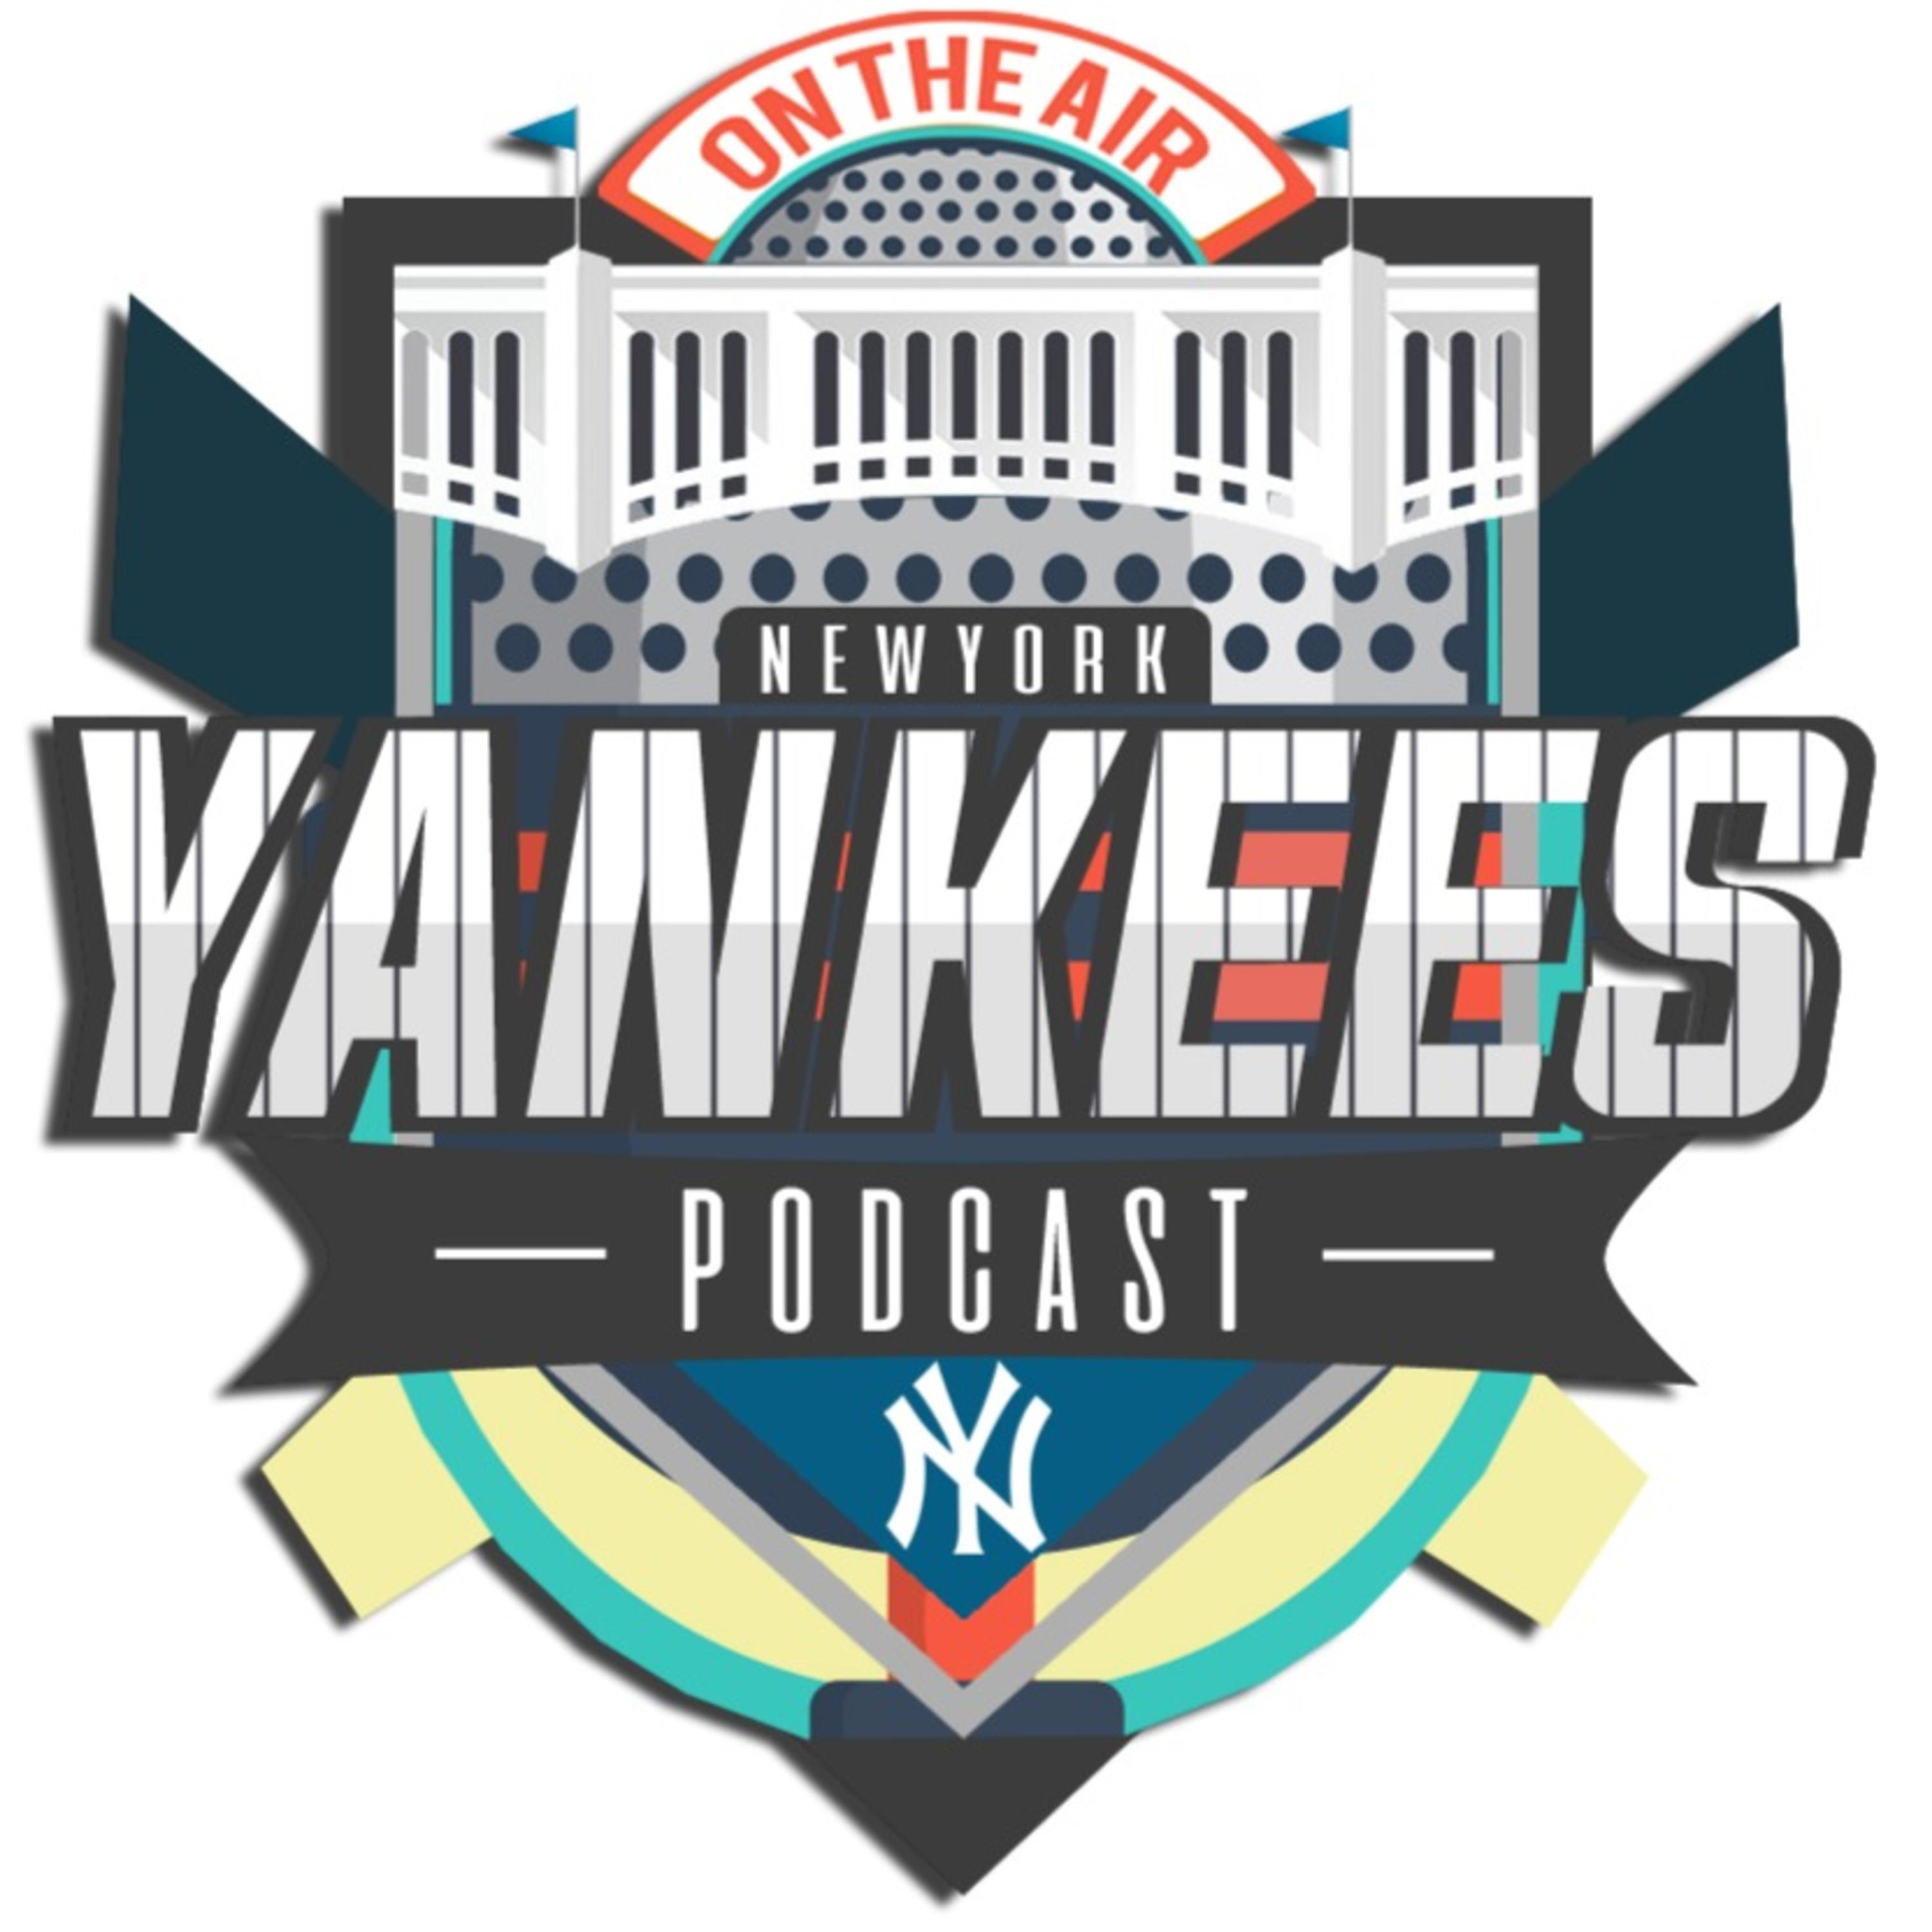 New York Yankees Hungary Podcast - Bé x DS! x Mike - S05EP12